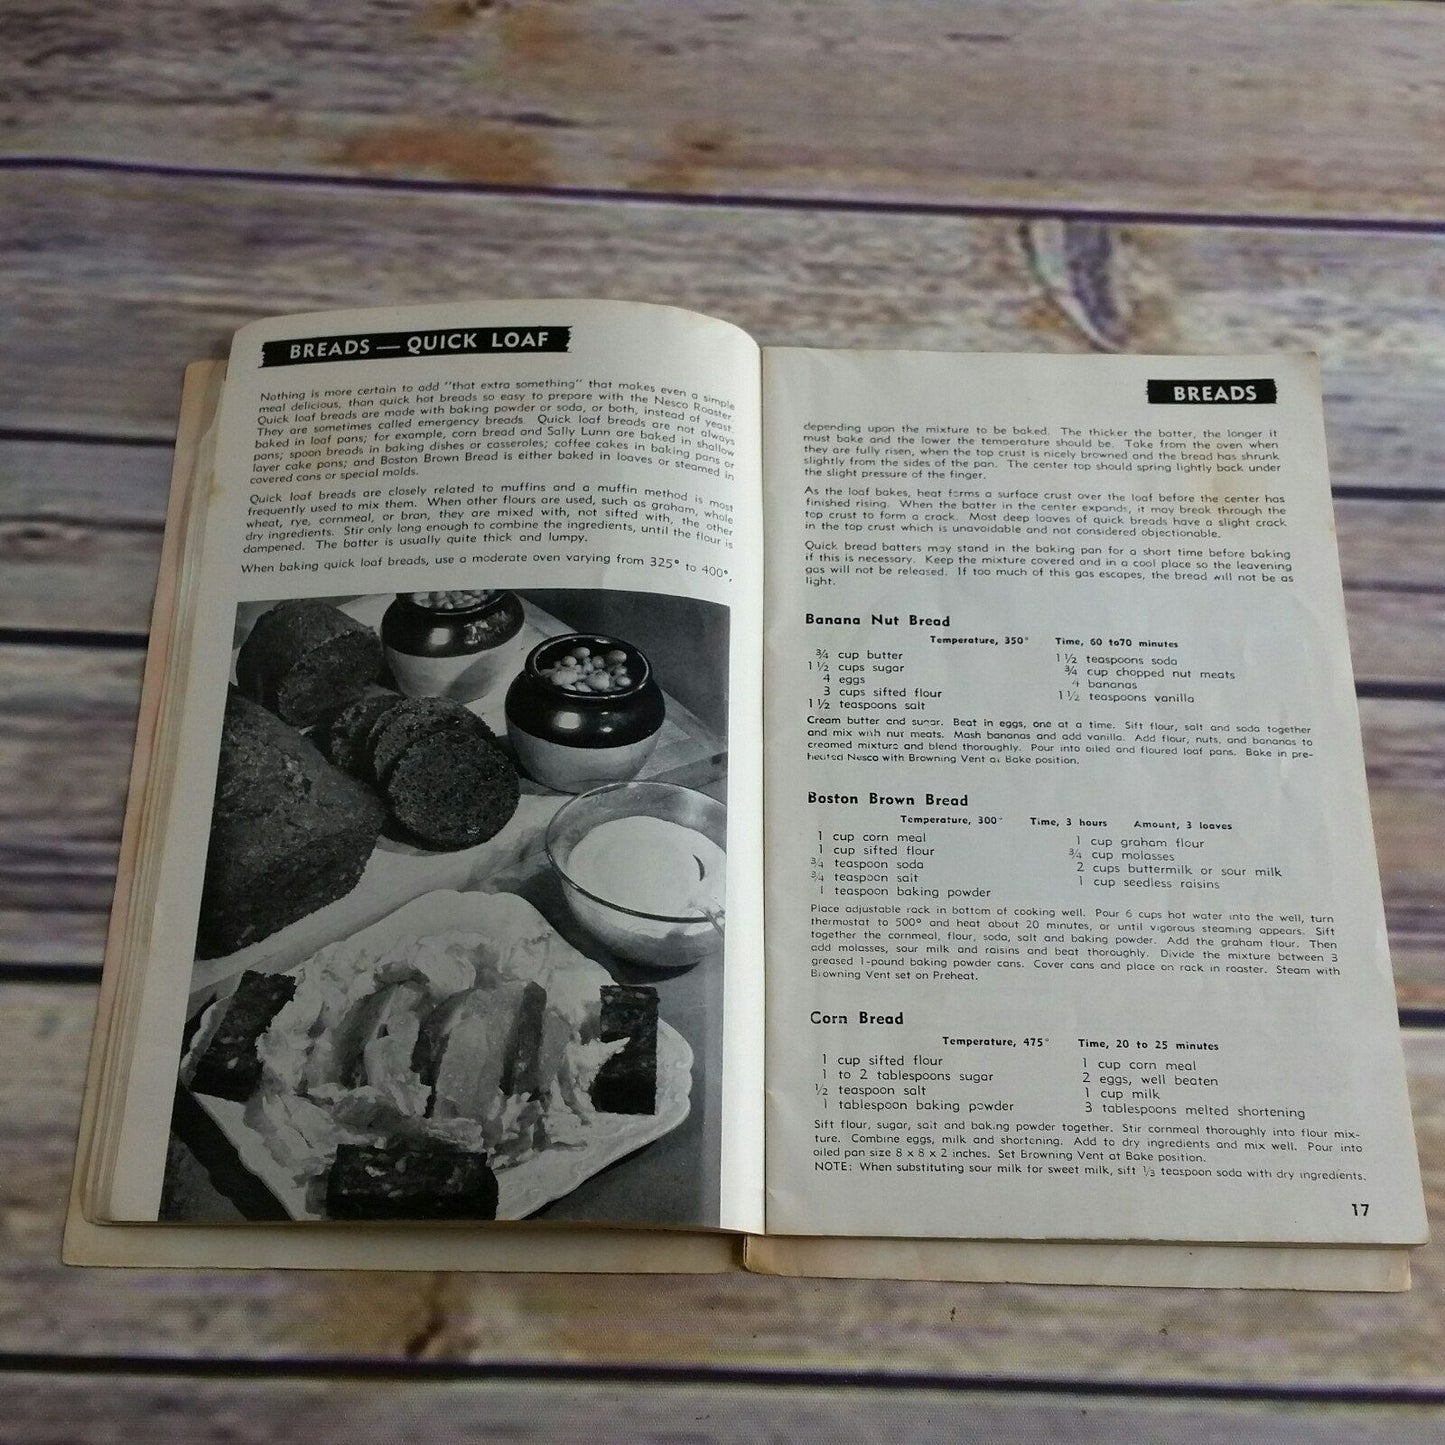 Vintage Cookbook Nesco Automatic Electric Roaster Oven Cooking Recipes Promo 1947 Manual Booklet Instructions Paperback